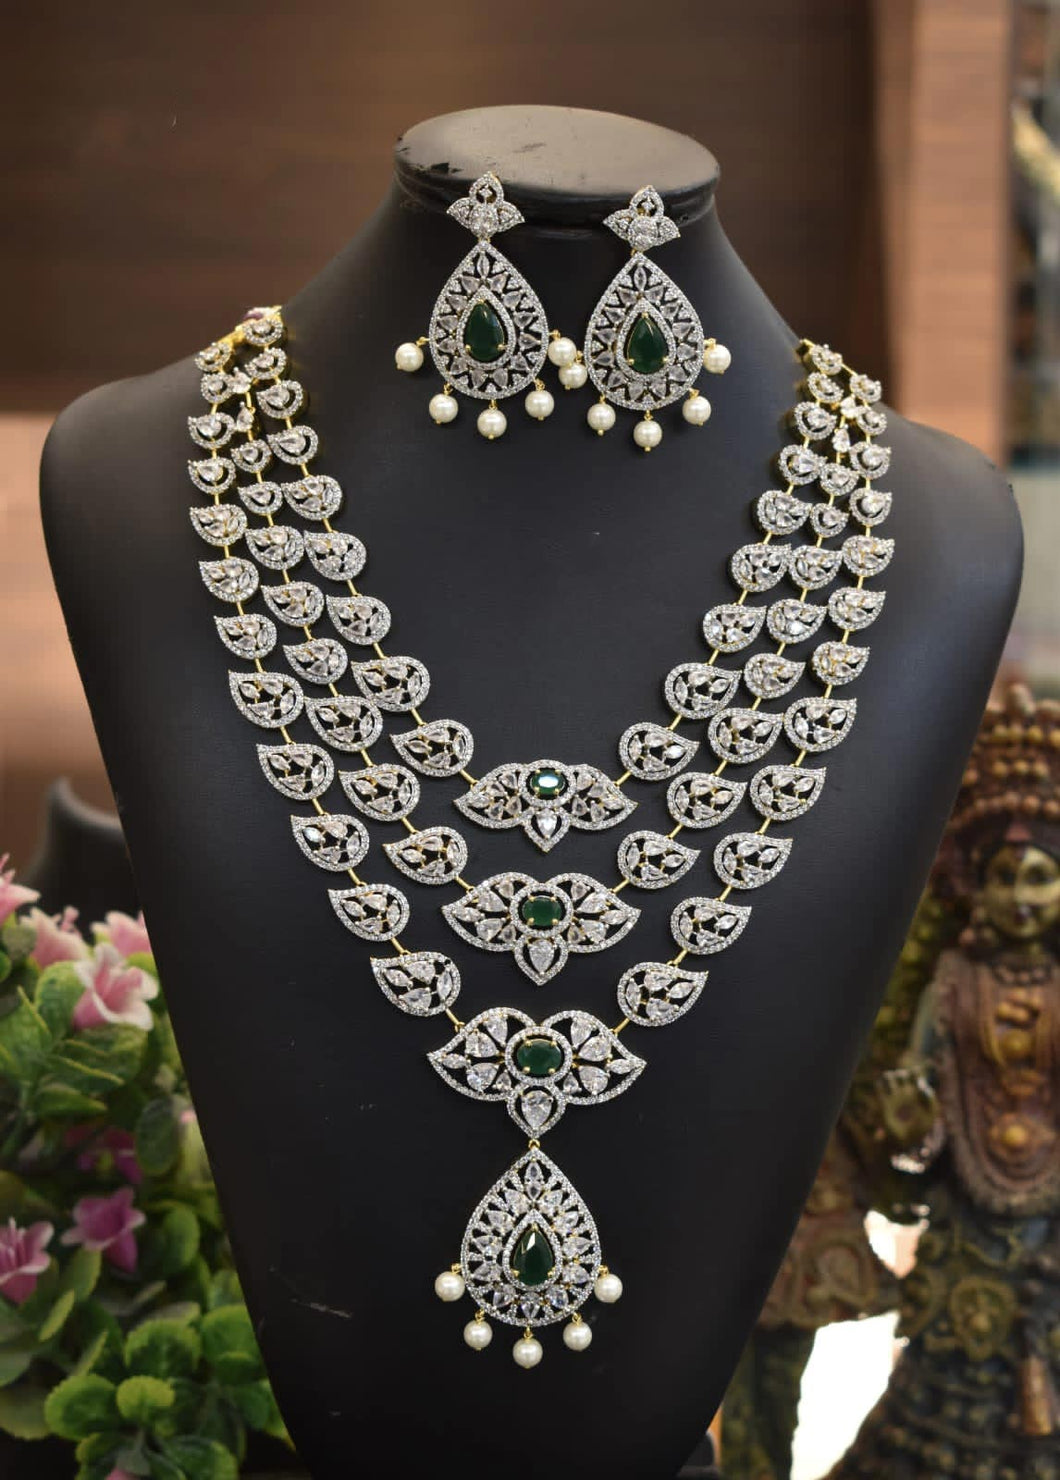 Dazzling Three Layer Neckpiece with Earrings